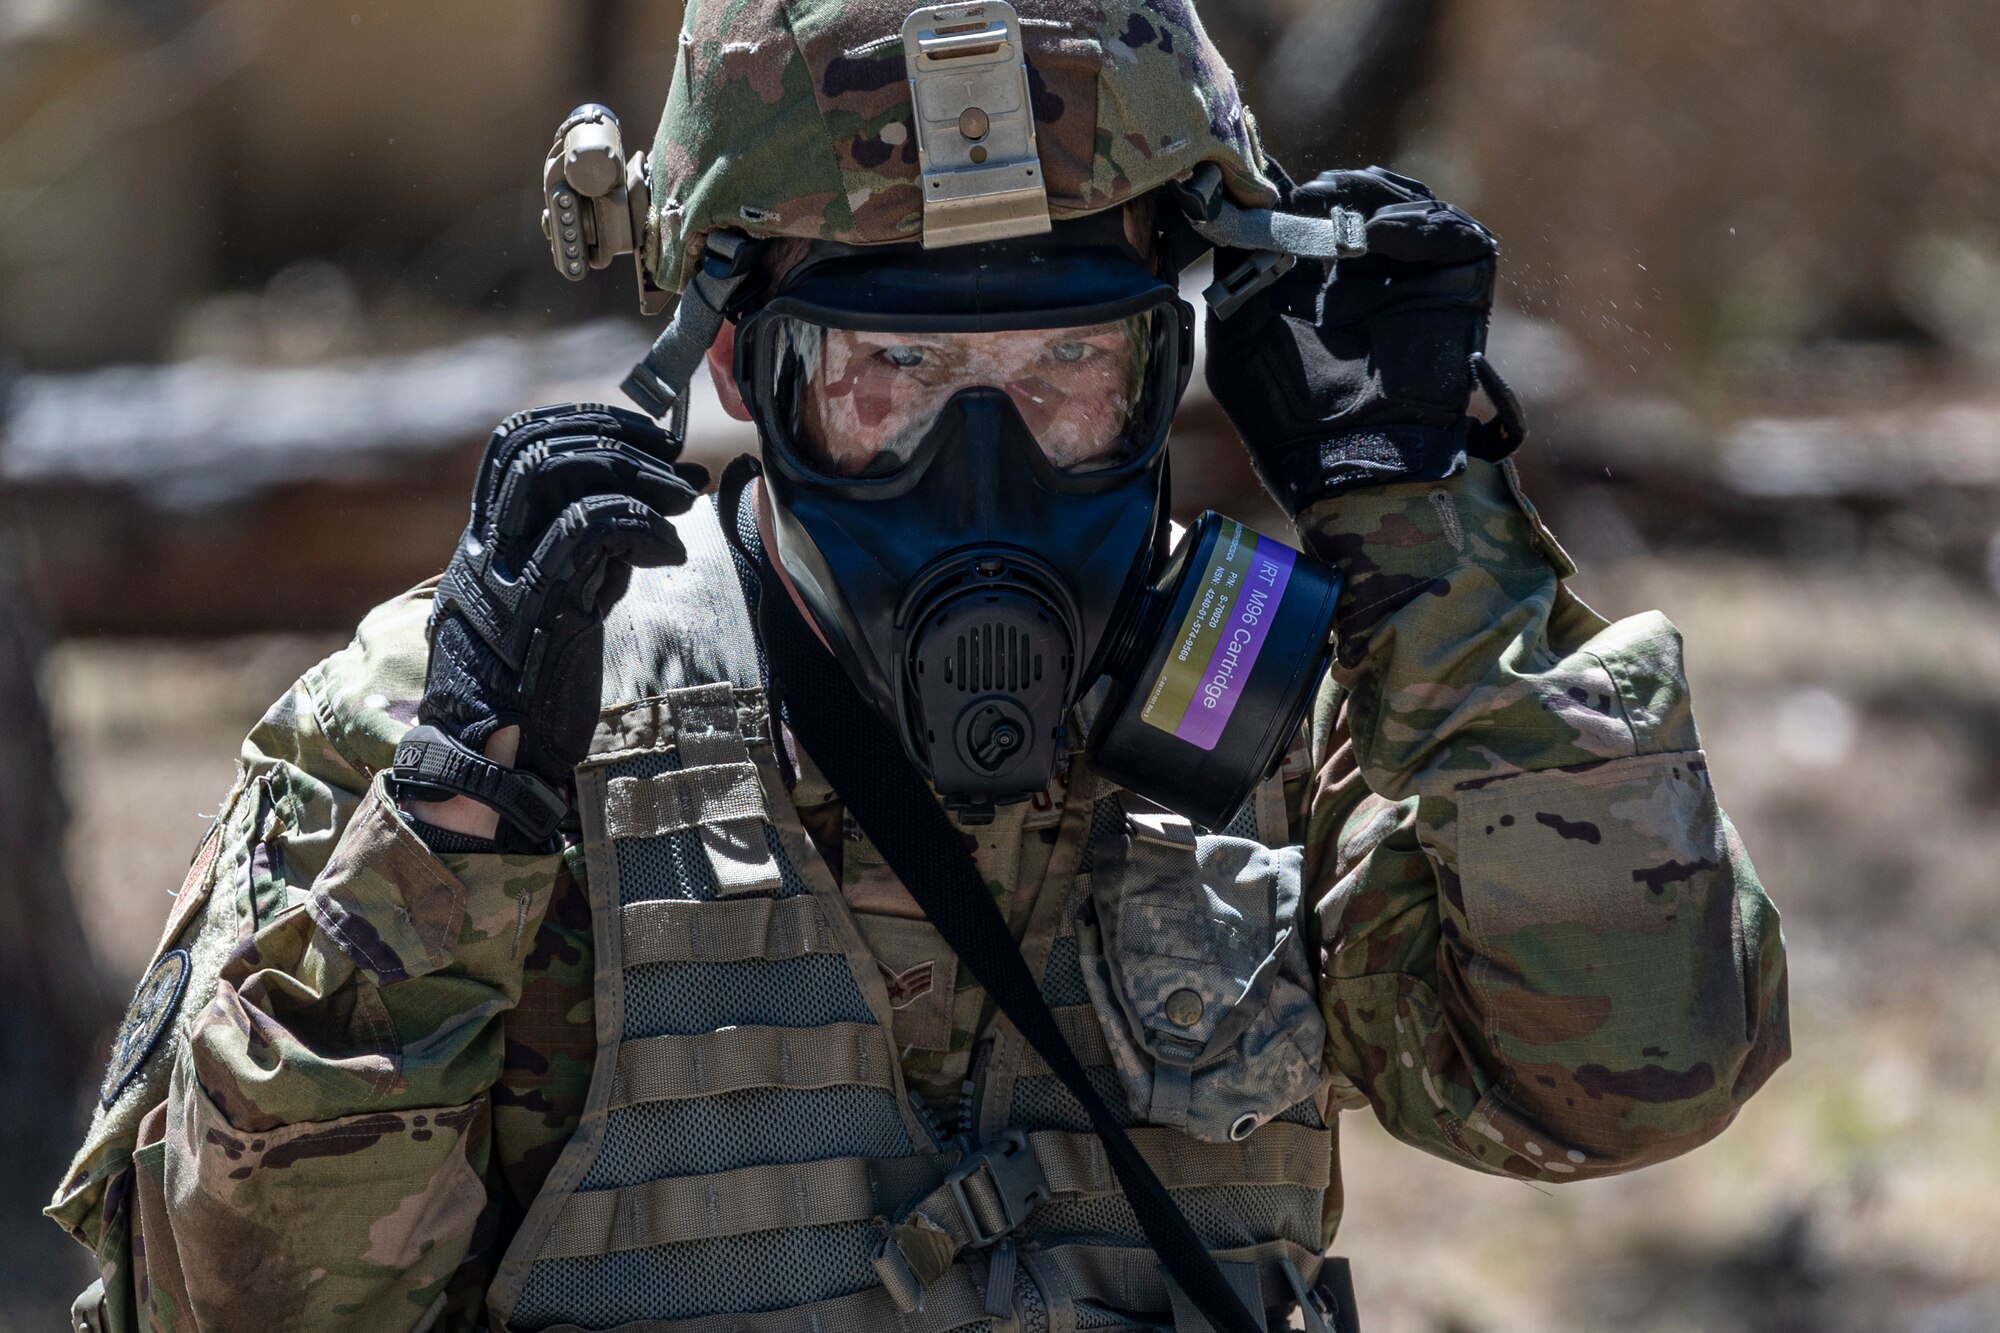 U.S. Air Force Senior Airman Alex Potts takes part in the New Jersey National Guard's Best Warrior Competition on Joint Base McGuire-Dix-Lakehurst, New Jersey, April 20, 2022. Potts is a survey team member with the 21st Weapons of Mass Destruction-Civil Support Team.